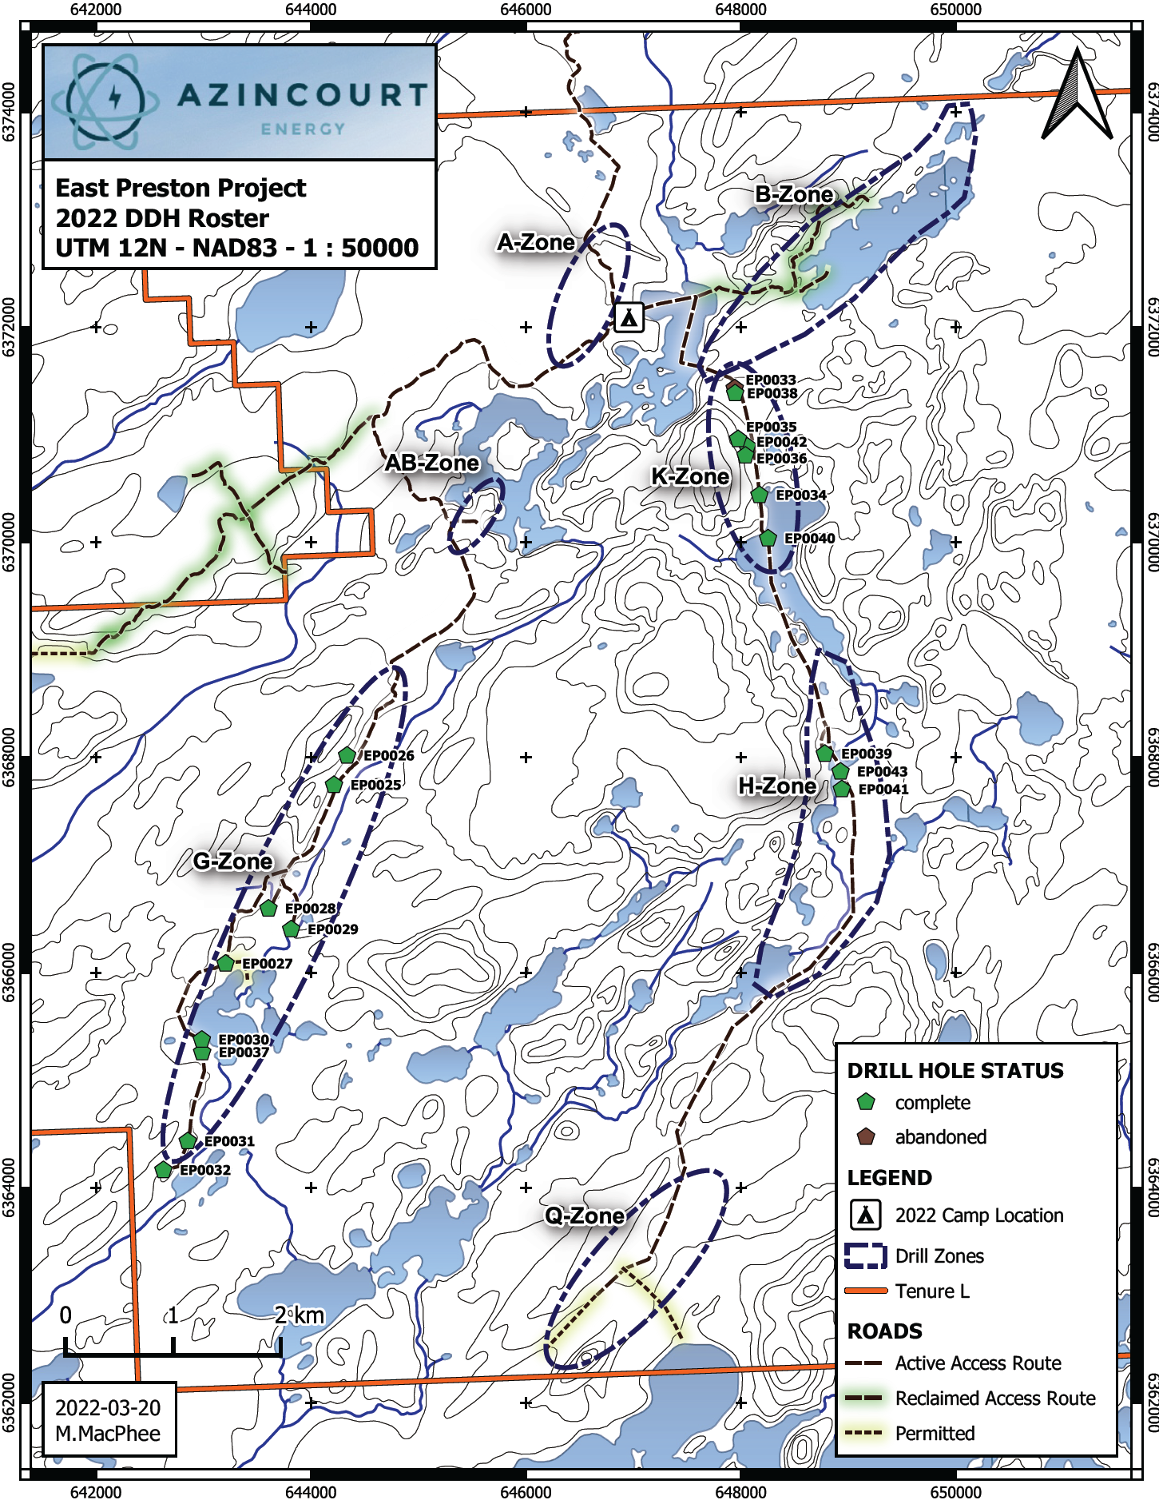 Figure 3: 2022 Drill Holes and Target areas at the East Preston Uranium Project